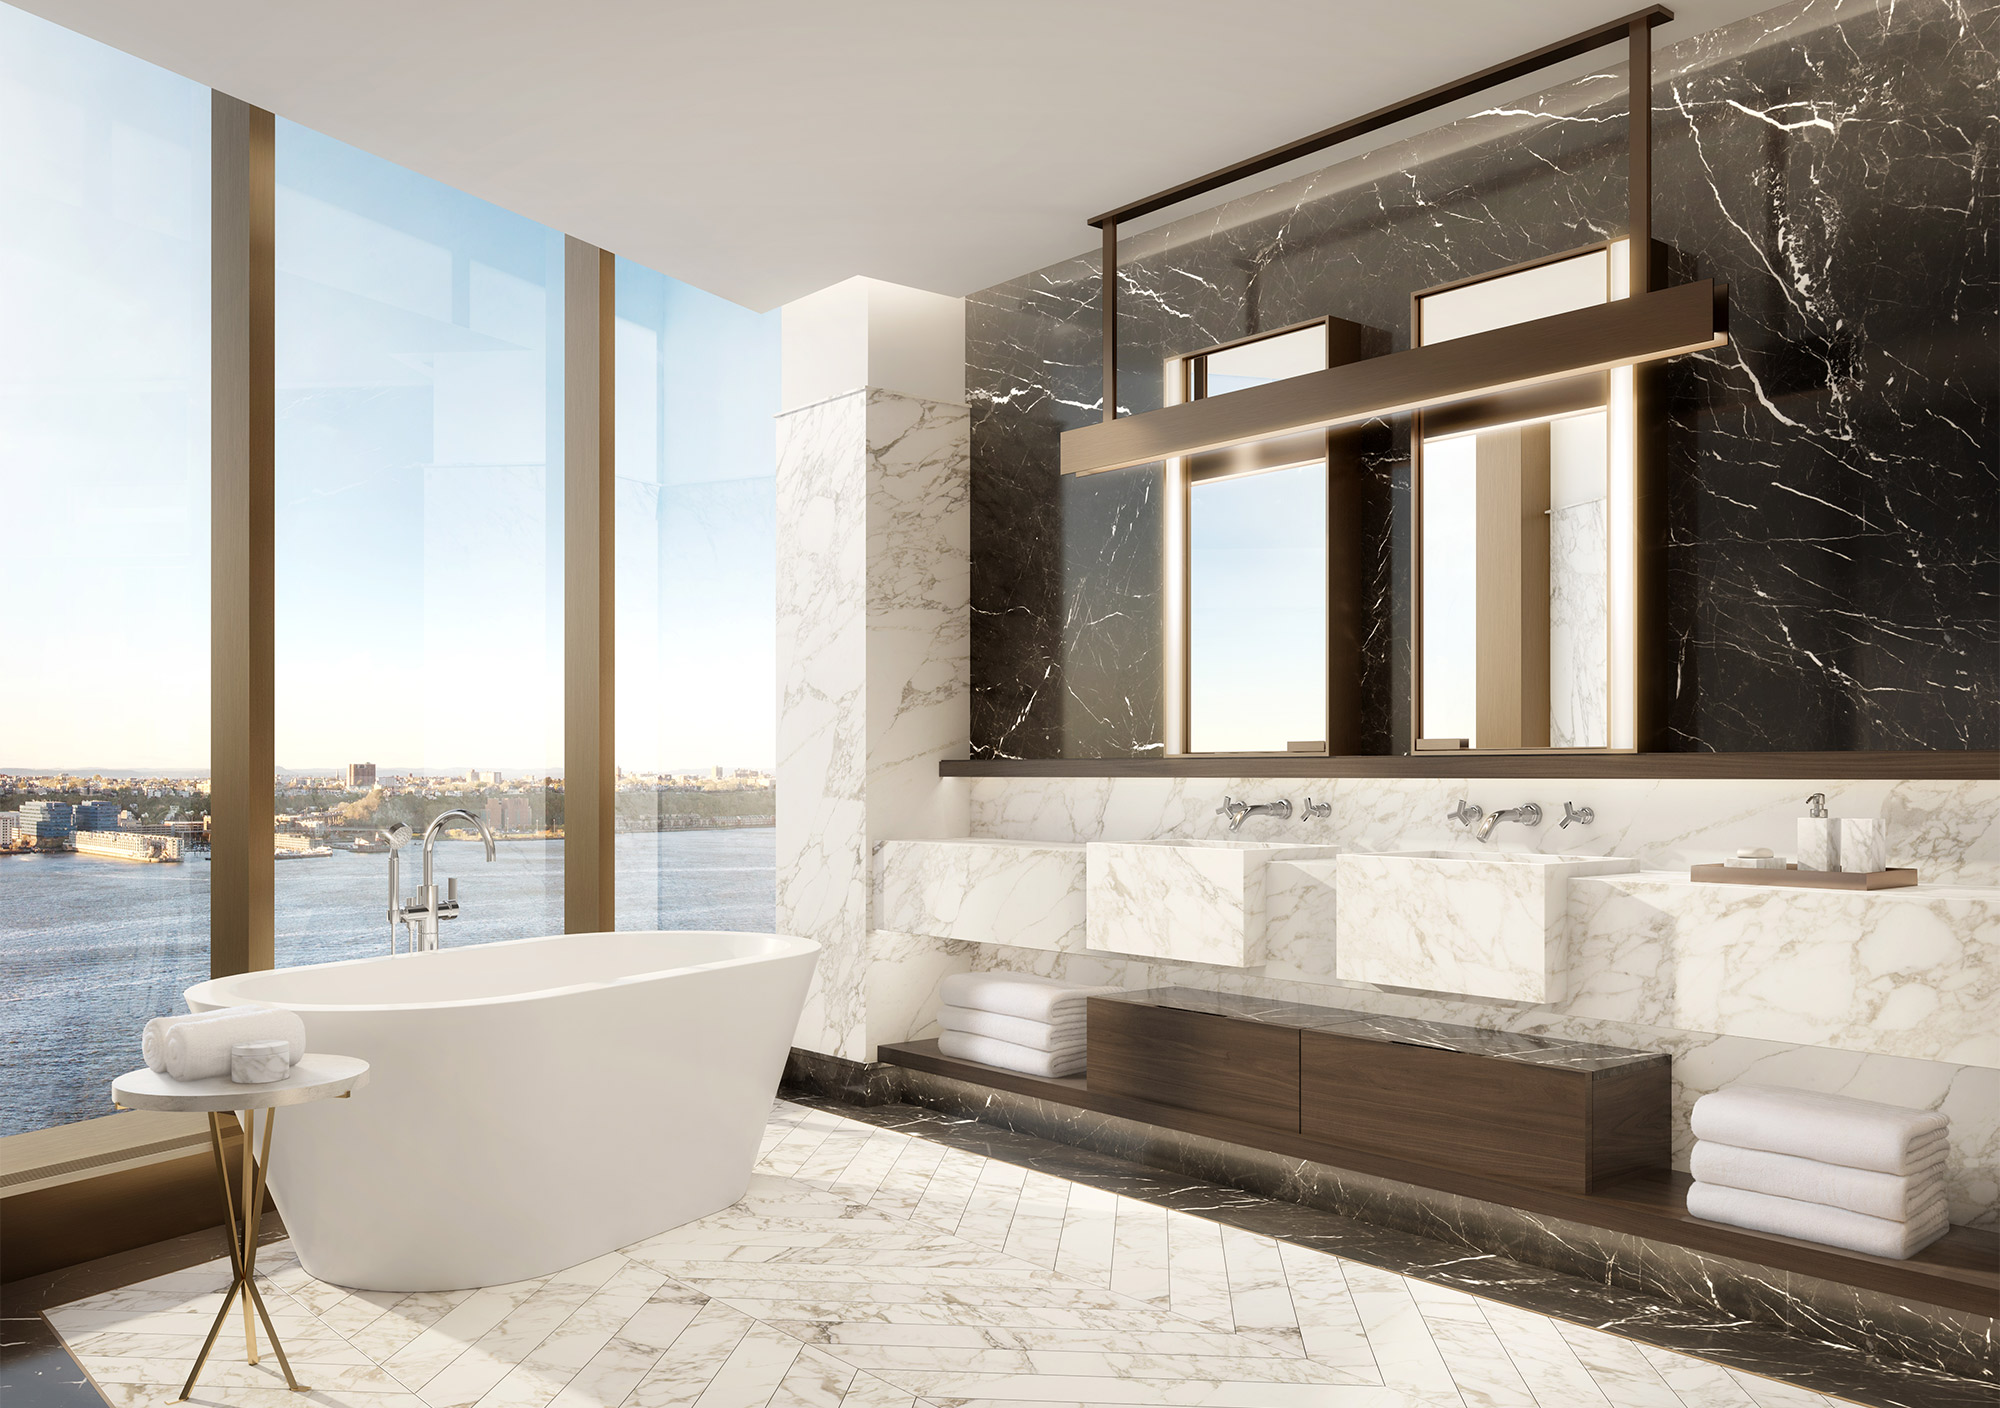 Bathroom with marble vanity, flooring and walls overlooking the Hudson River